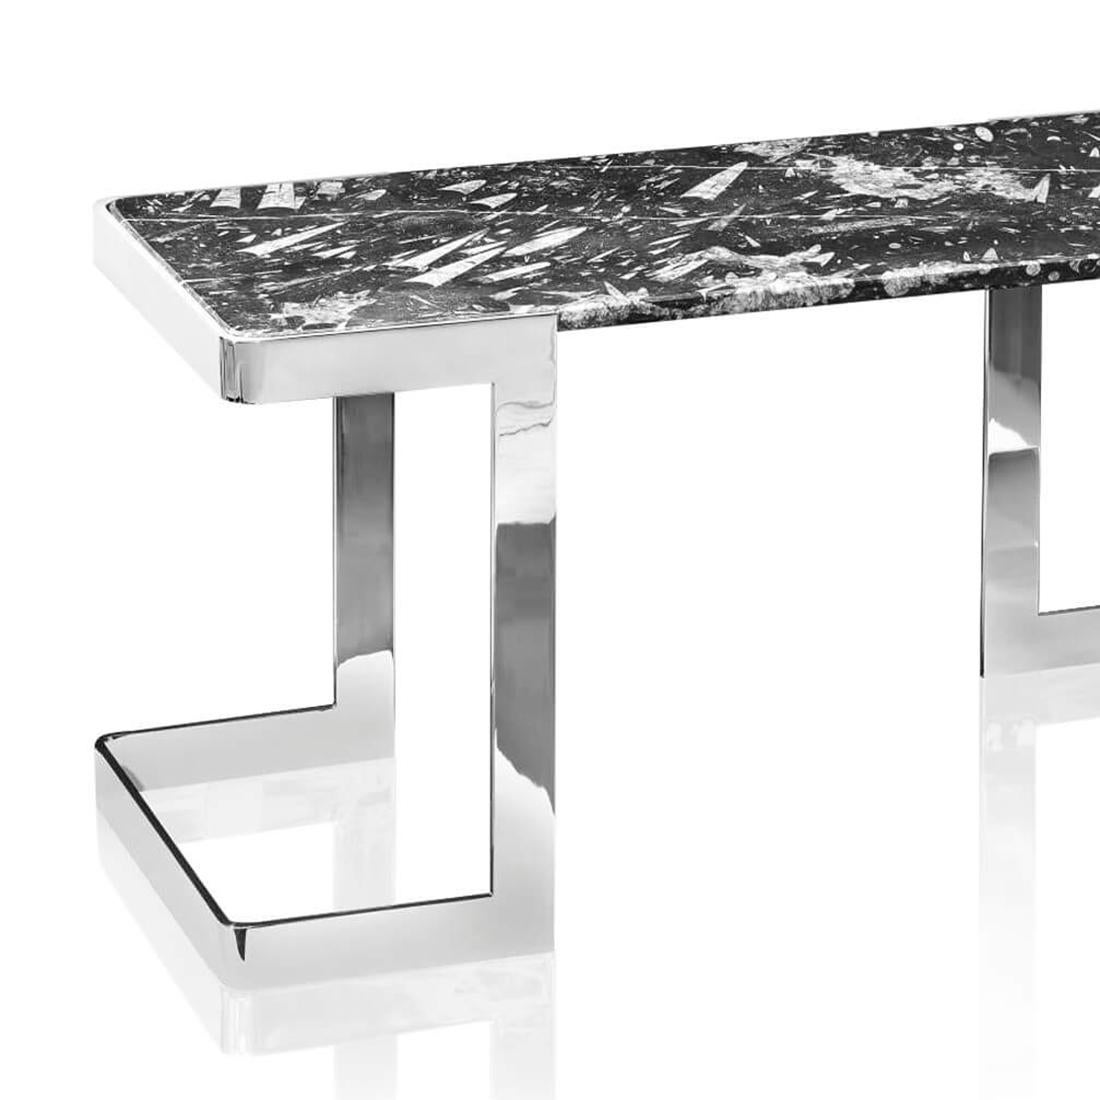 Console table Empreinte small
with structure in chrome finish
with marble top.